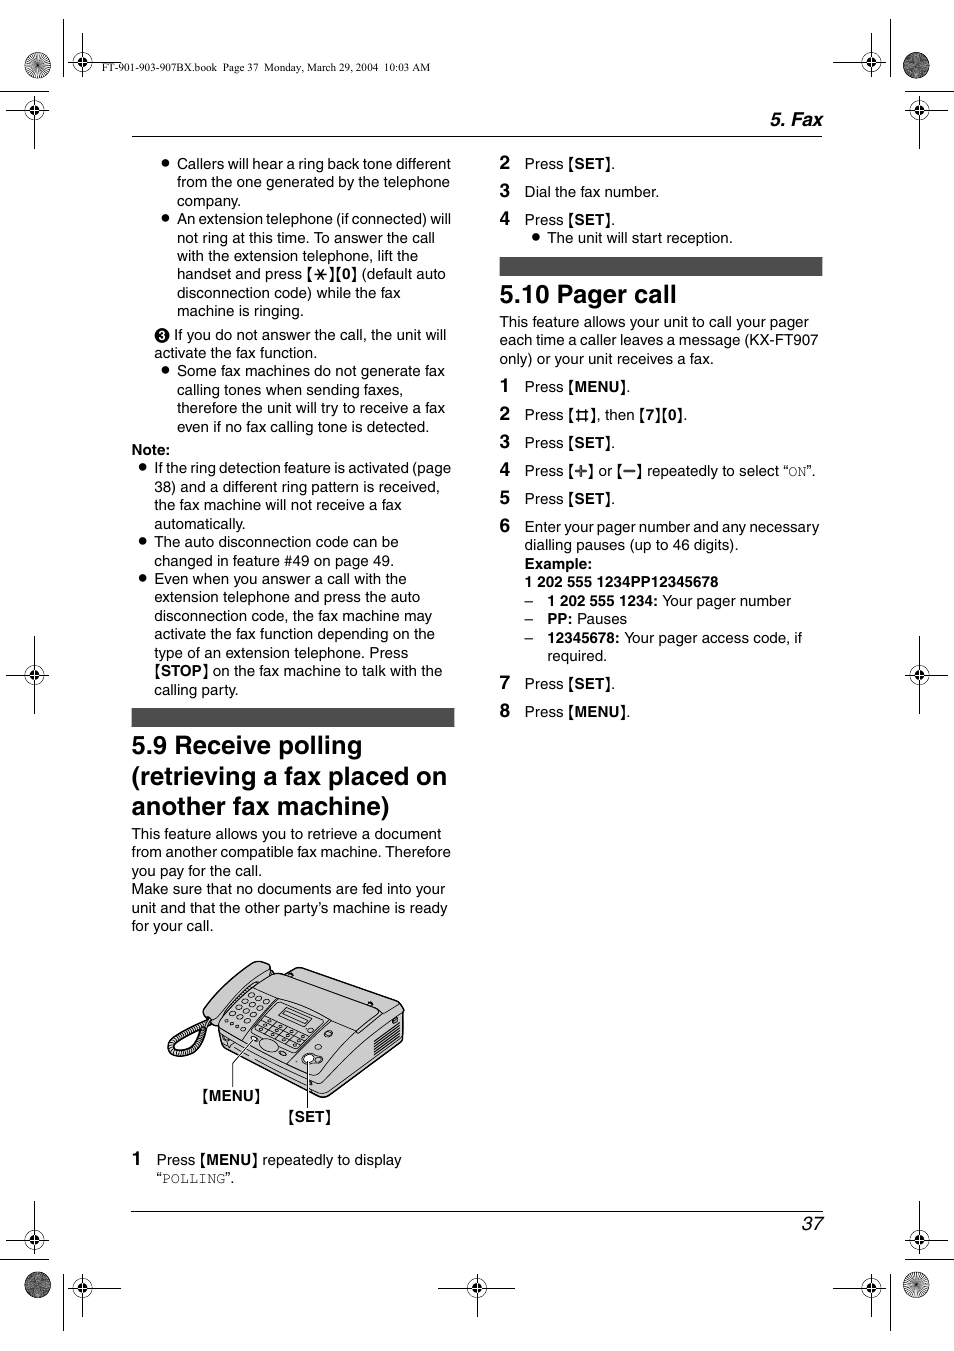 10 pager call | Panasonic KX-FT901BX User Manual | Page 37 / 64